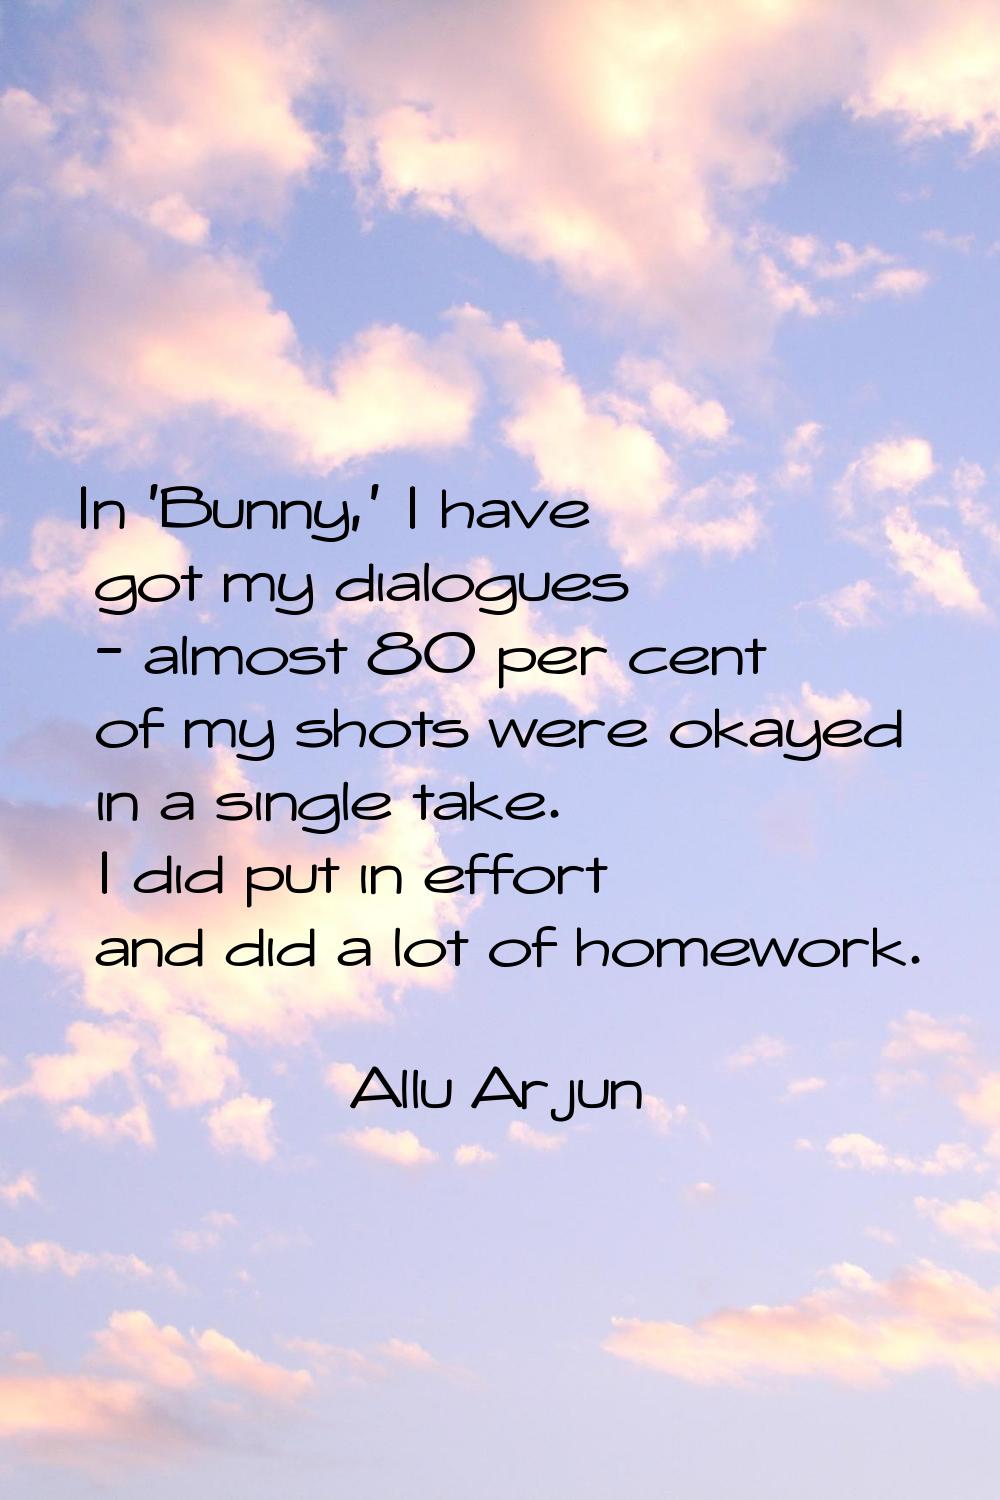 In 'Bunny,' I have got my dialogues - almost 80 per cent of my shots were okayed in a single take. 